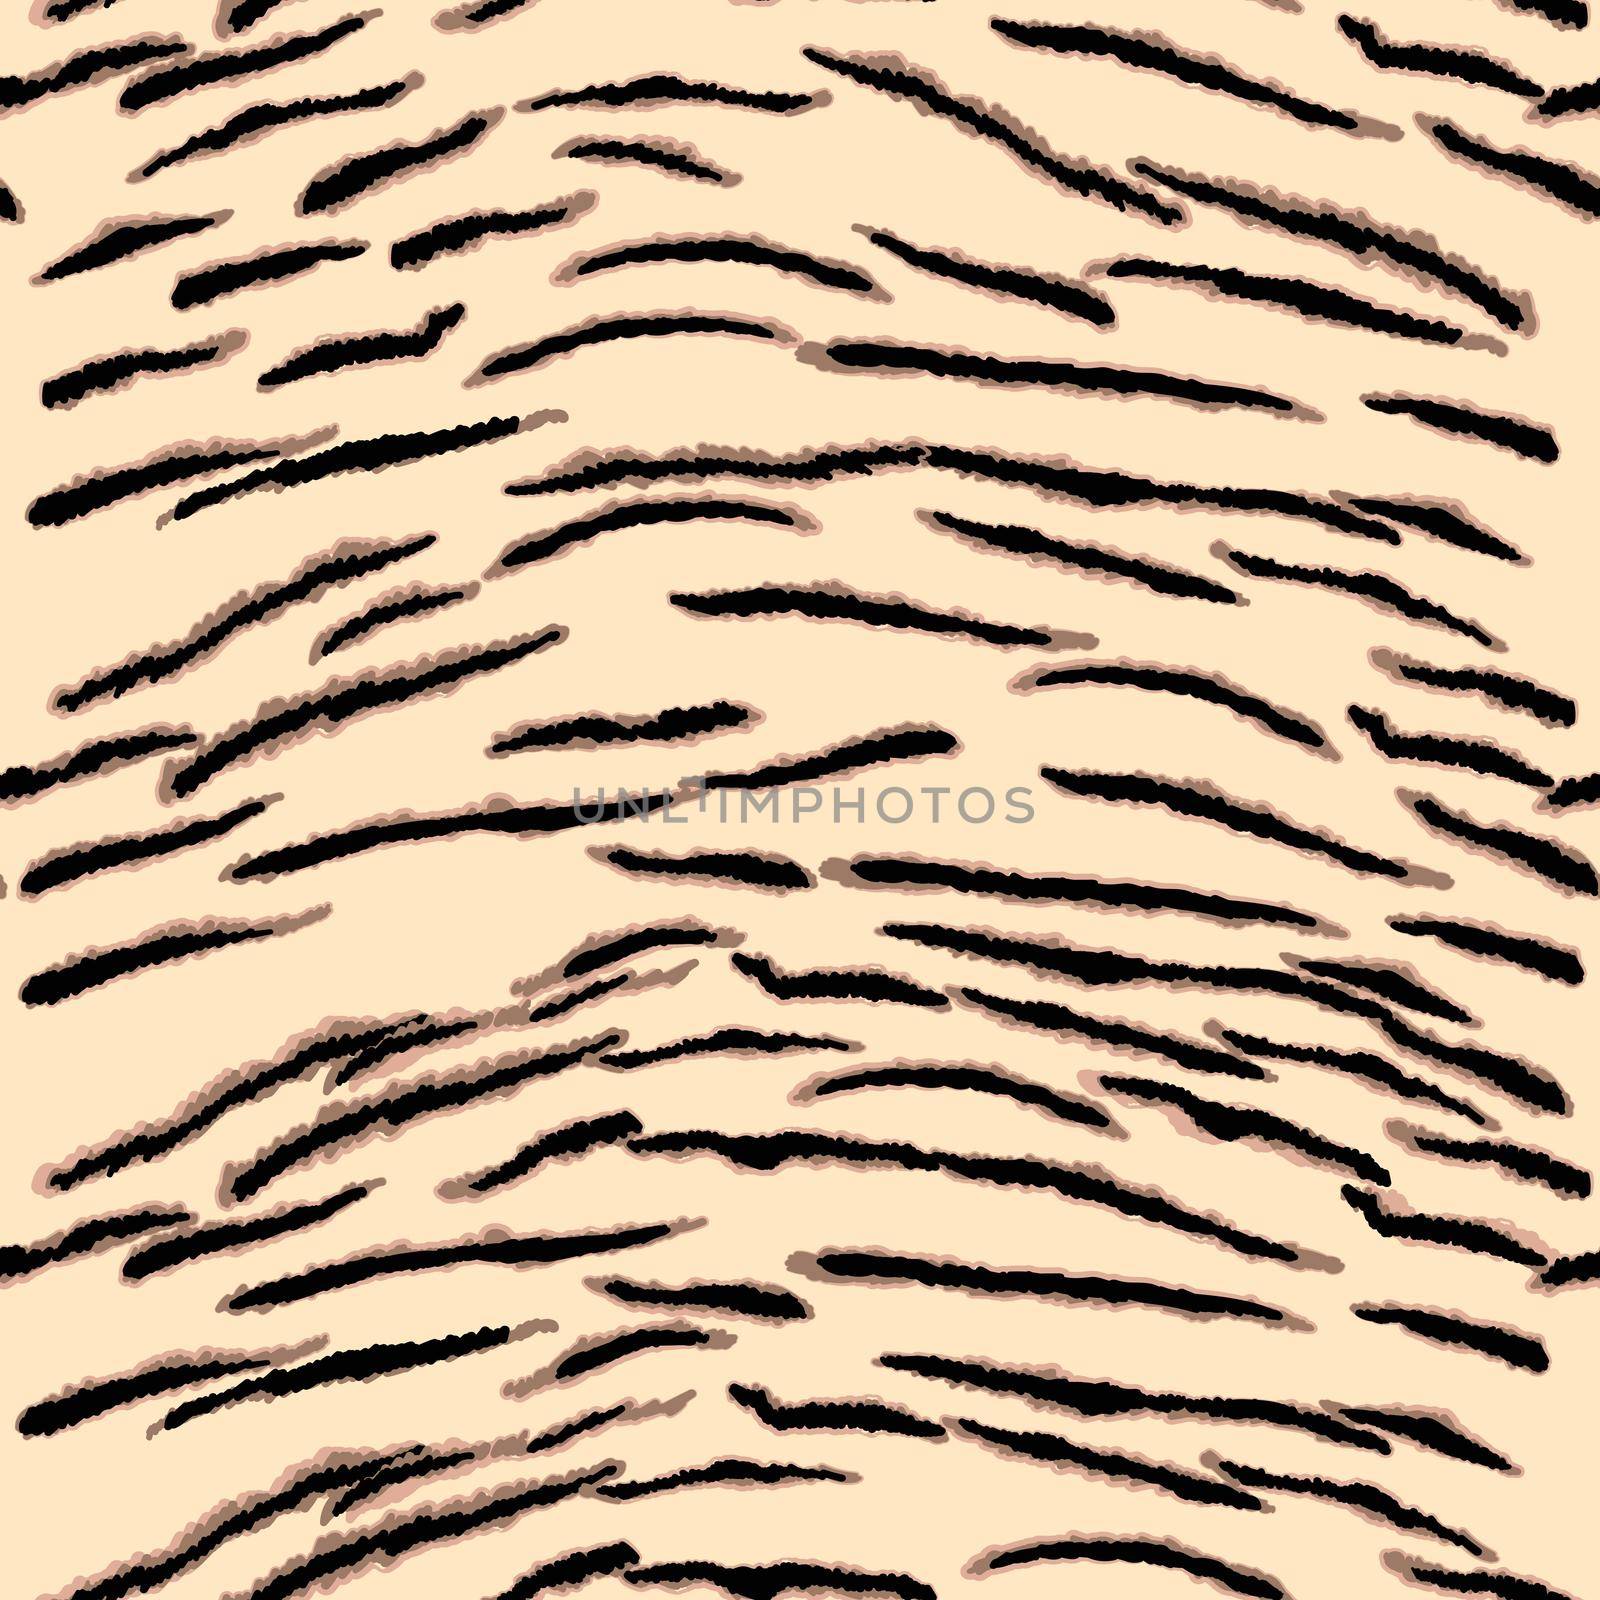 Abstract modern tiger seamless pattern. Animals trendy background. Beige and black decorative vector stock illustration for print, card, postcard, fabric, textile. Modern ornament of stylized skin.